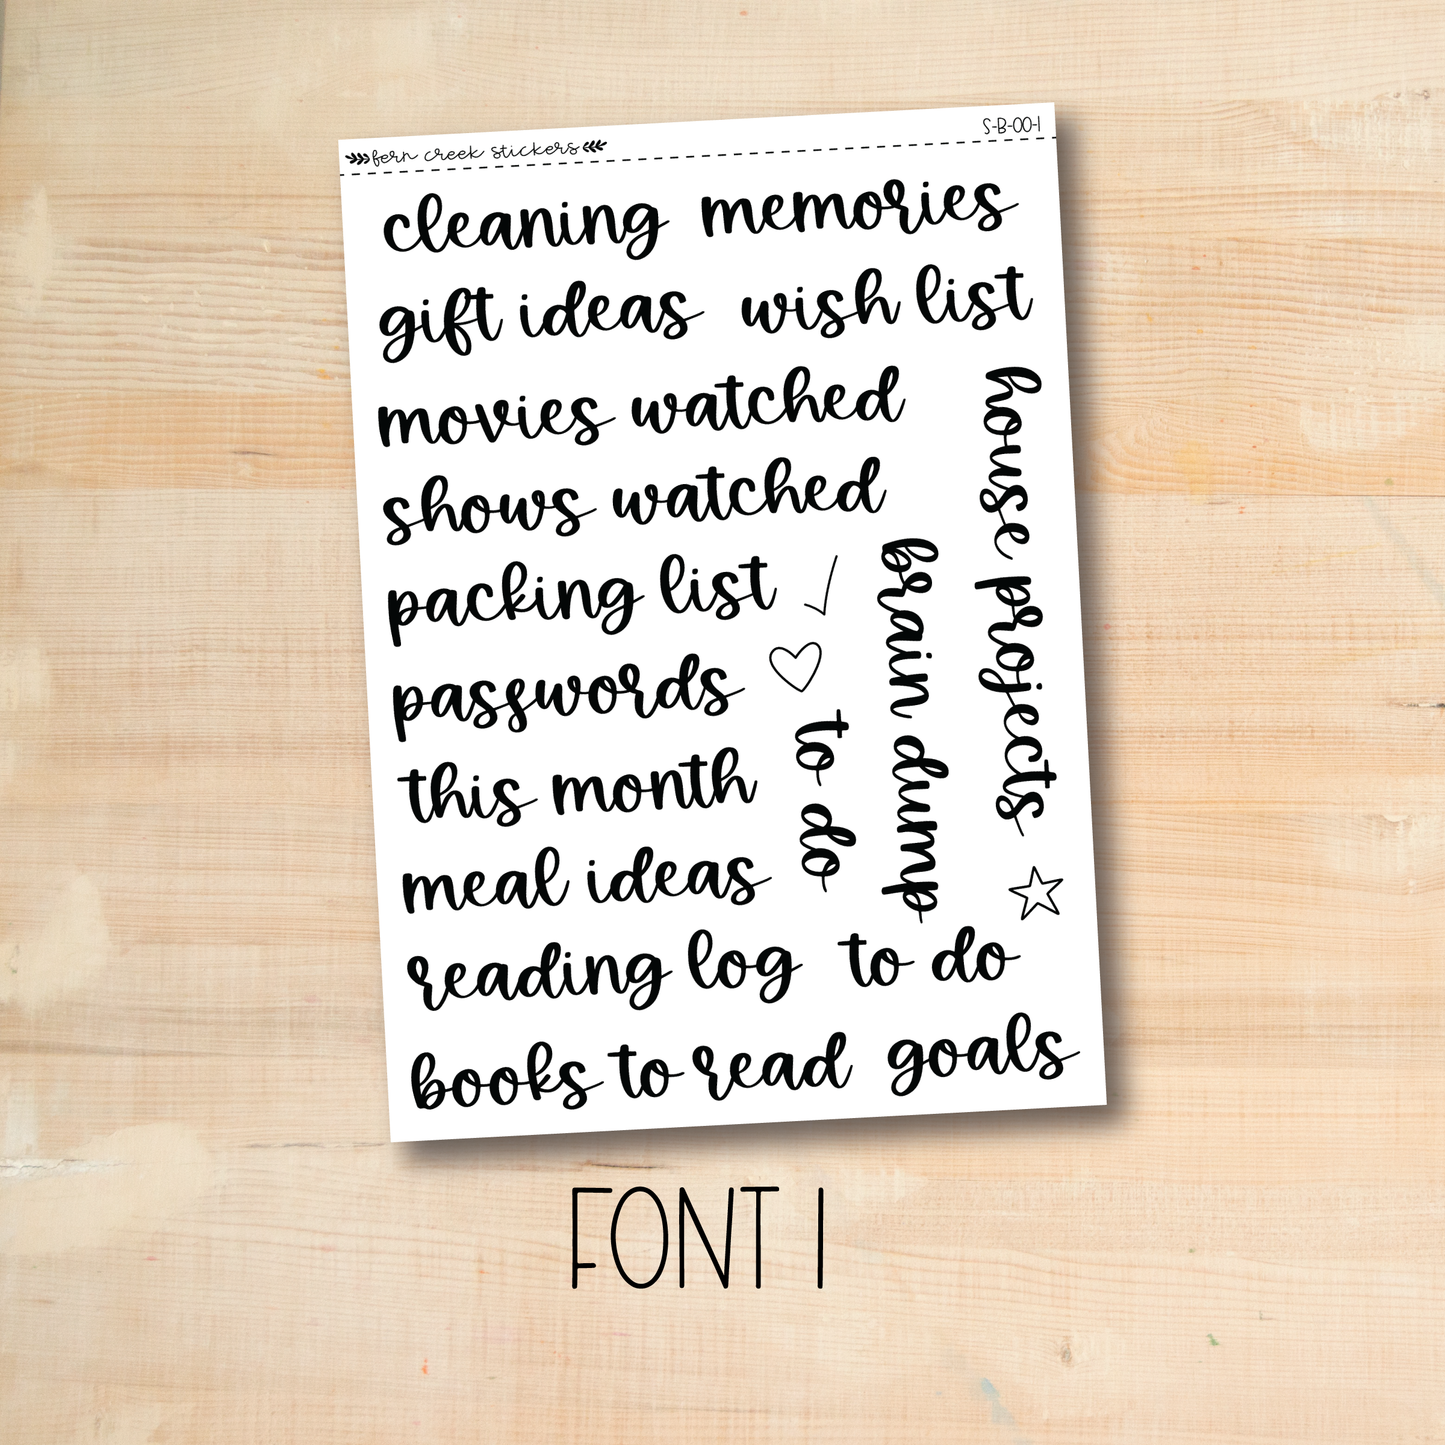 S-B-00 || Mixed notes page header script stickers